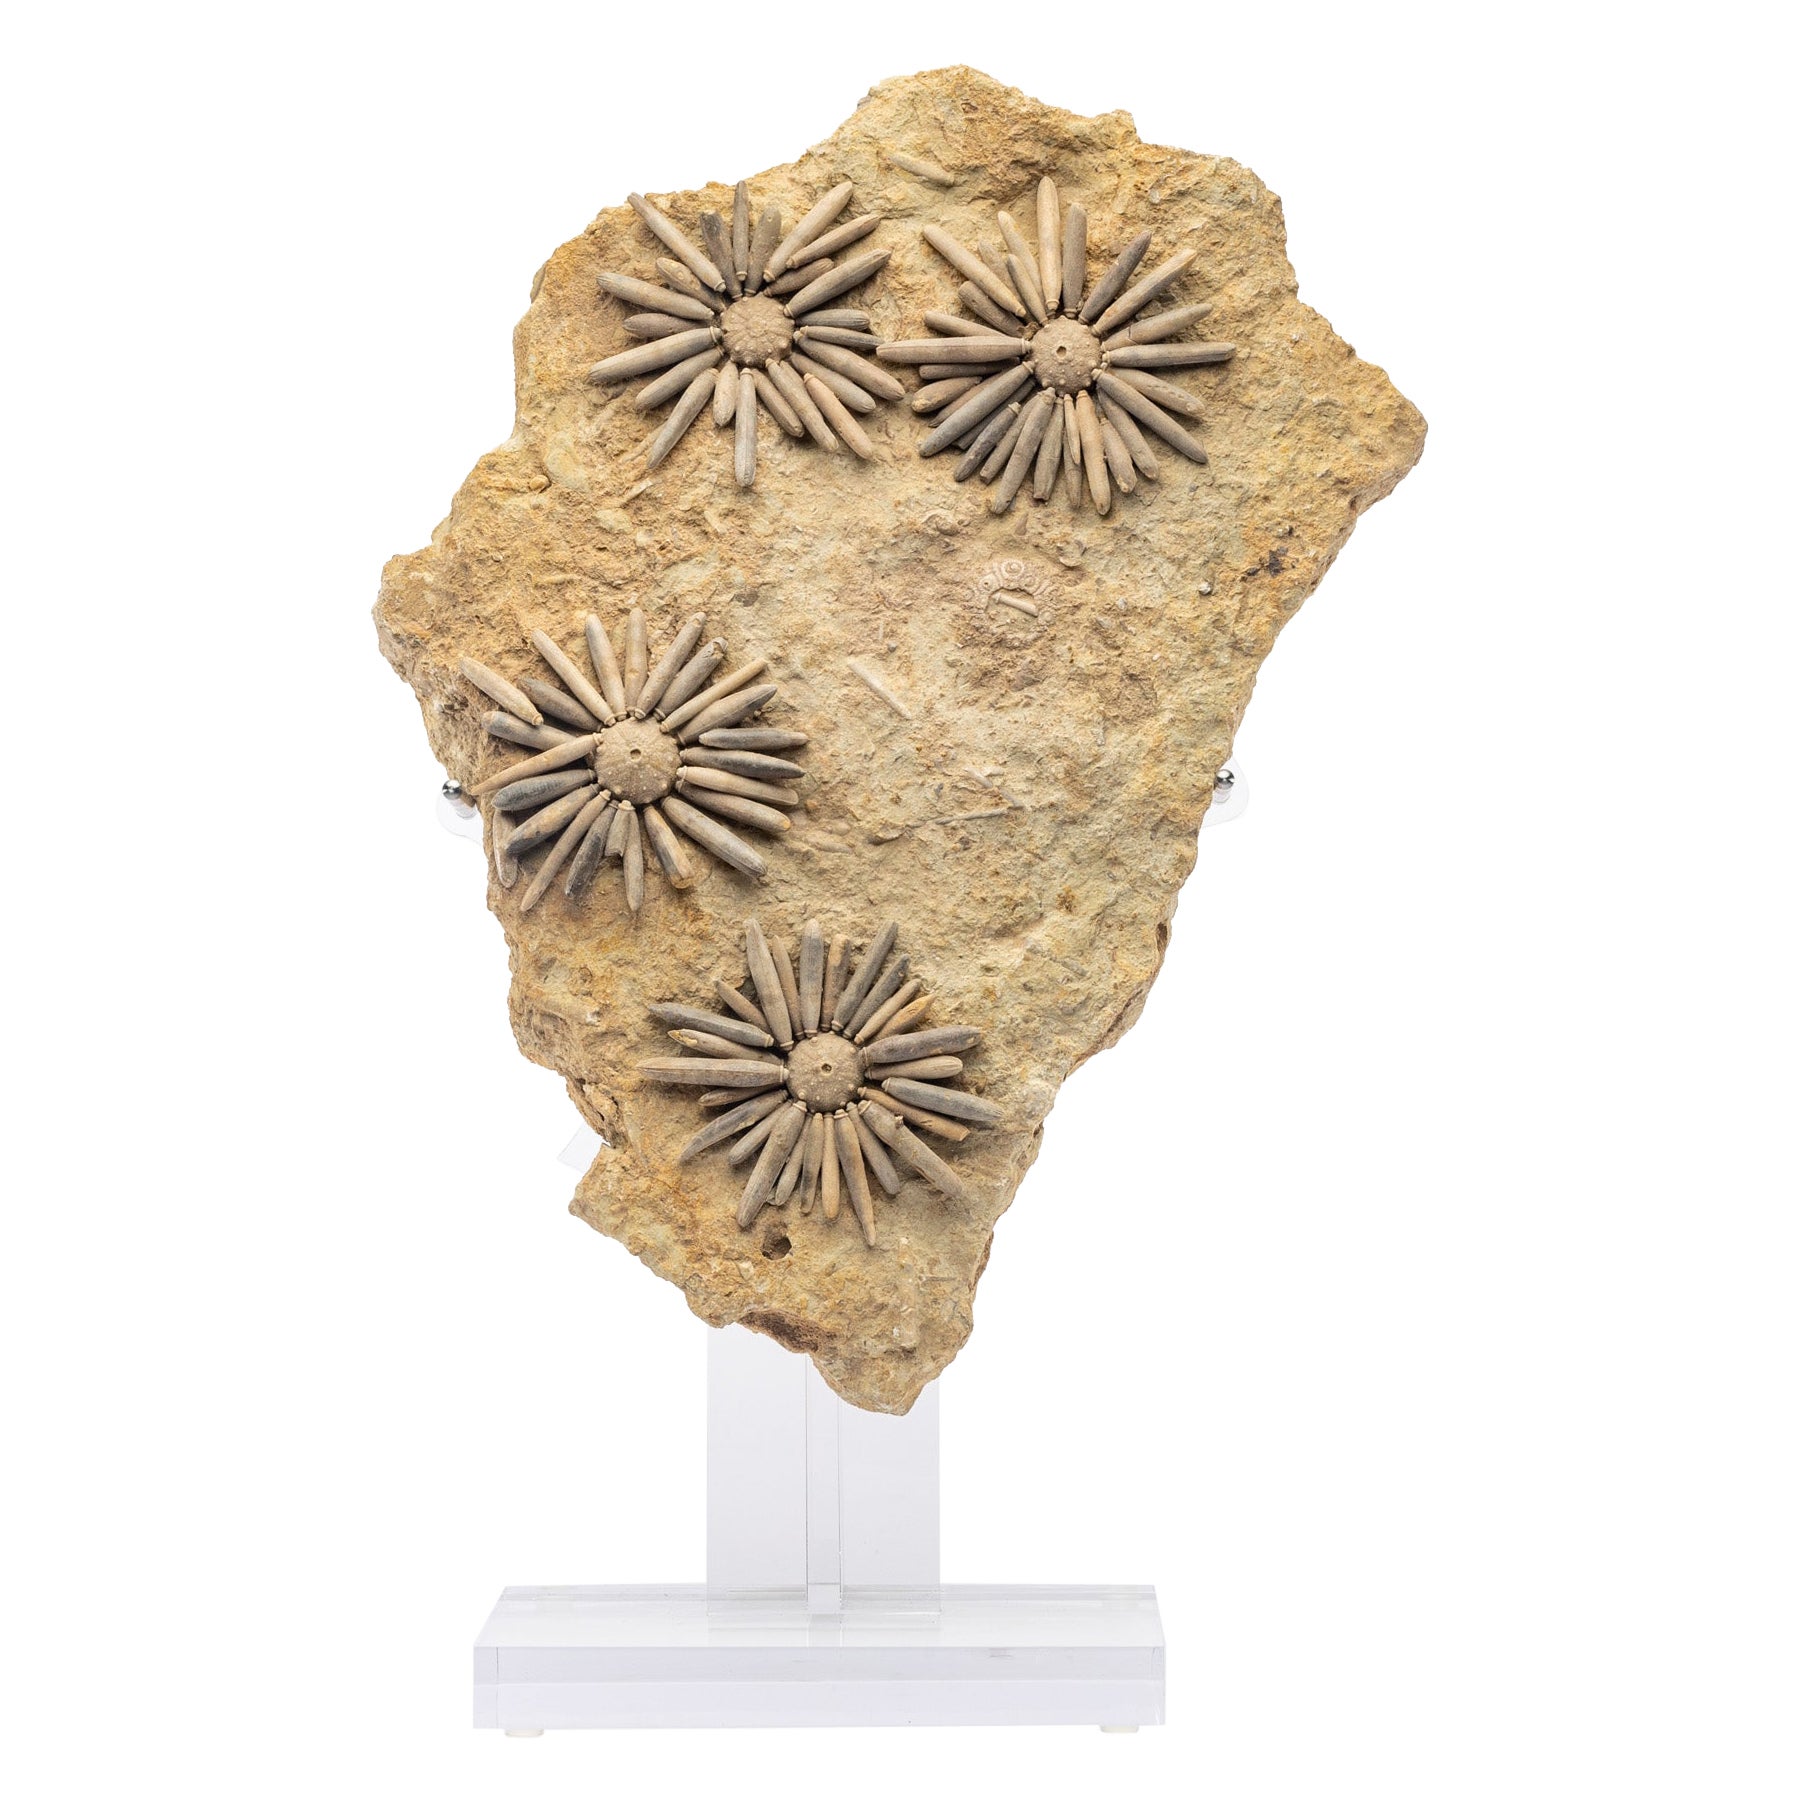 Fossil Sea Urchin from Morocco, Early Jurassic '170 Million Years Old'